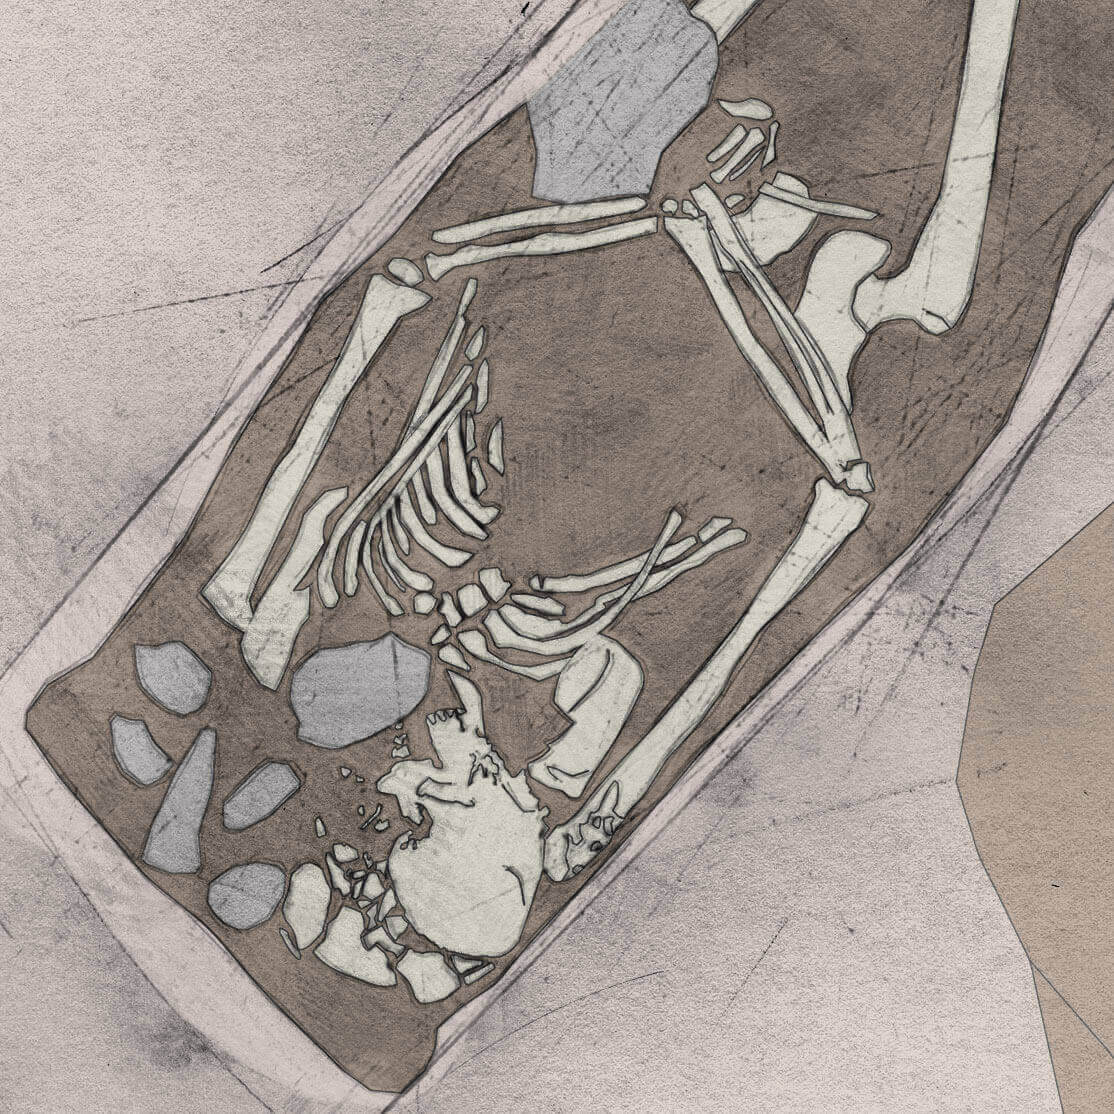 A drawing of skeleton with codename Pīp-drēam as discovered in the bowl hole graveyard